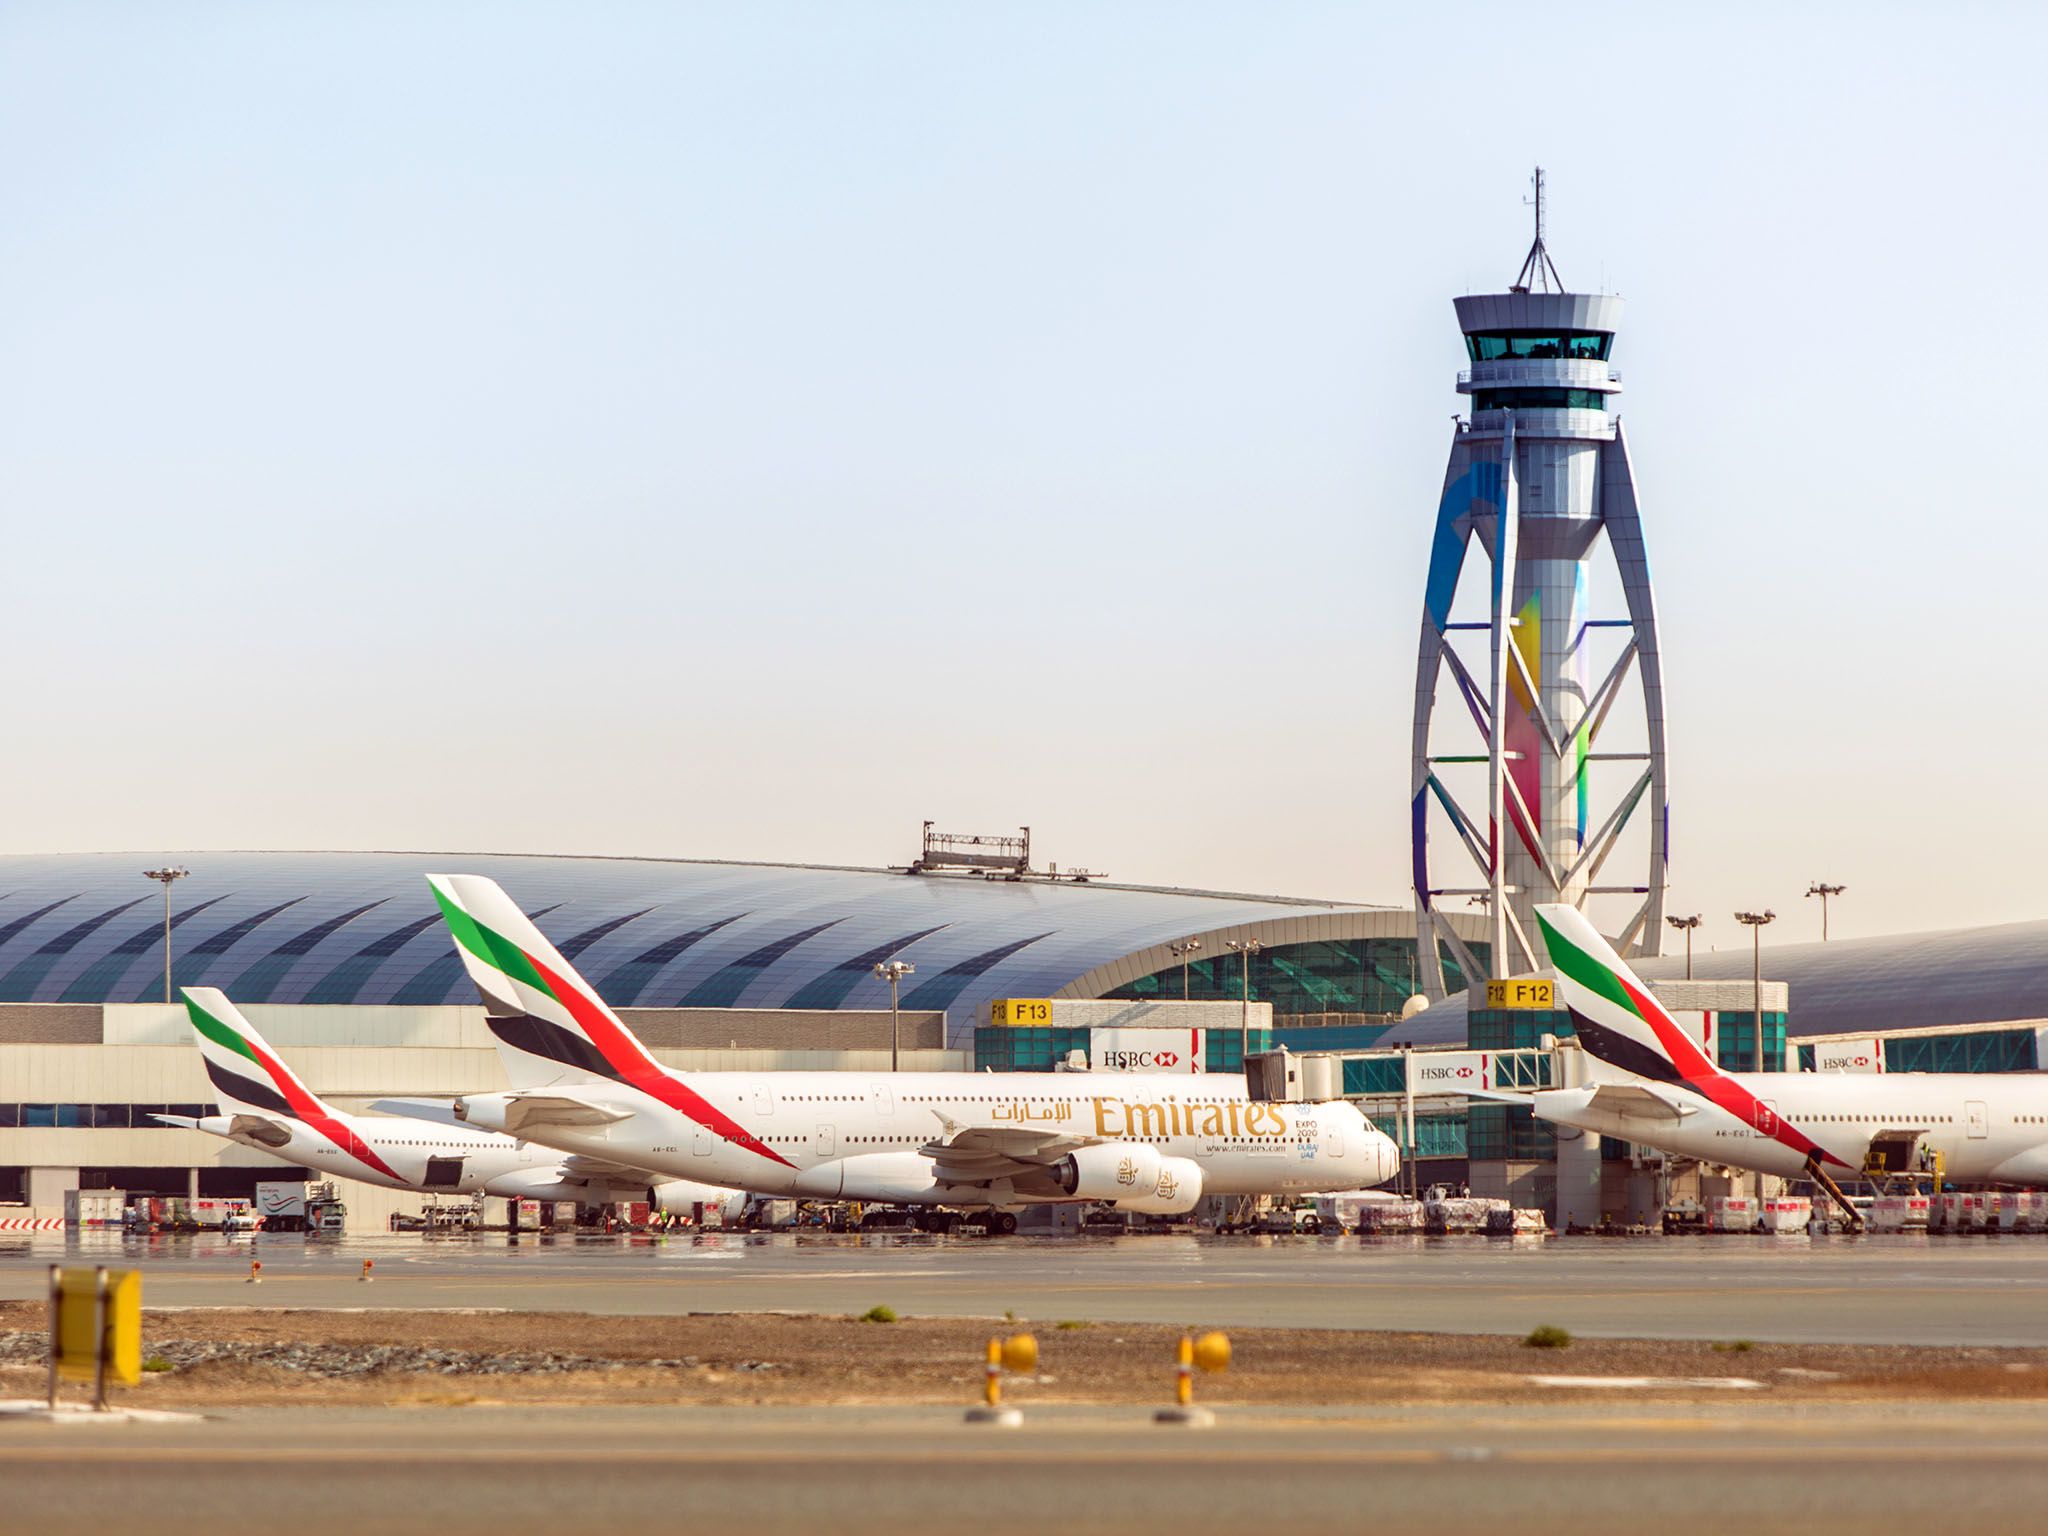 Dubai: The air traffic control tower. This image is from Ultimate Airport Dubai. [Photo of the day - October 2015]